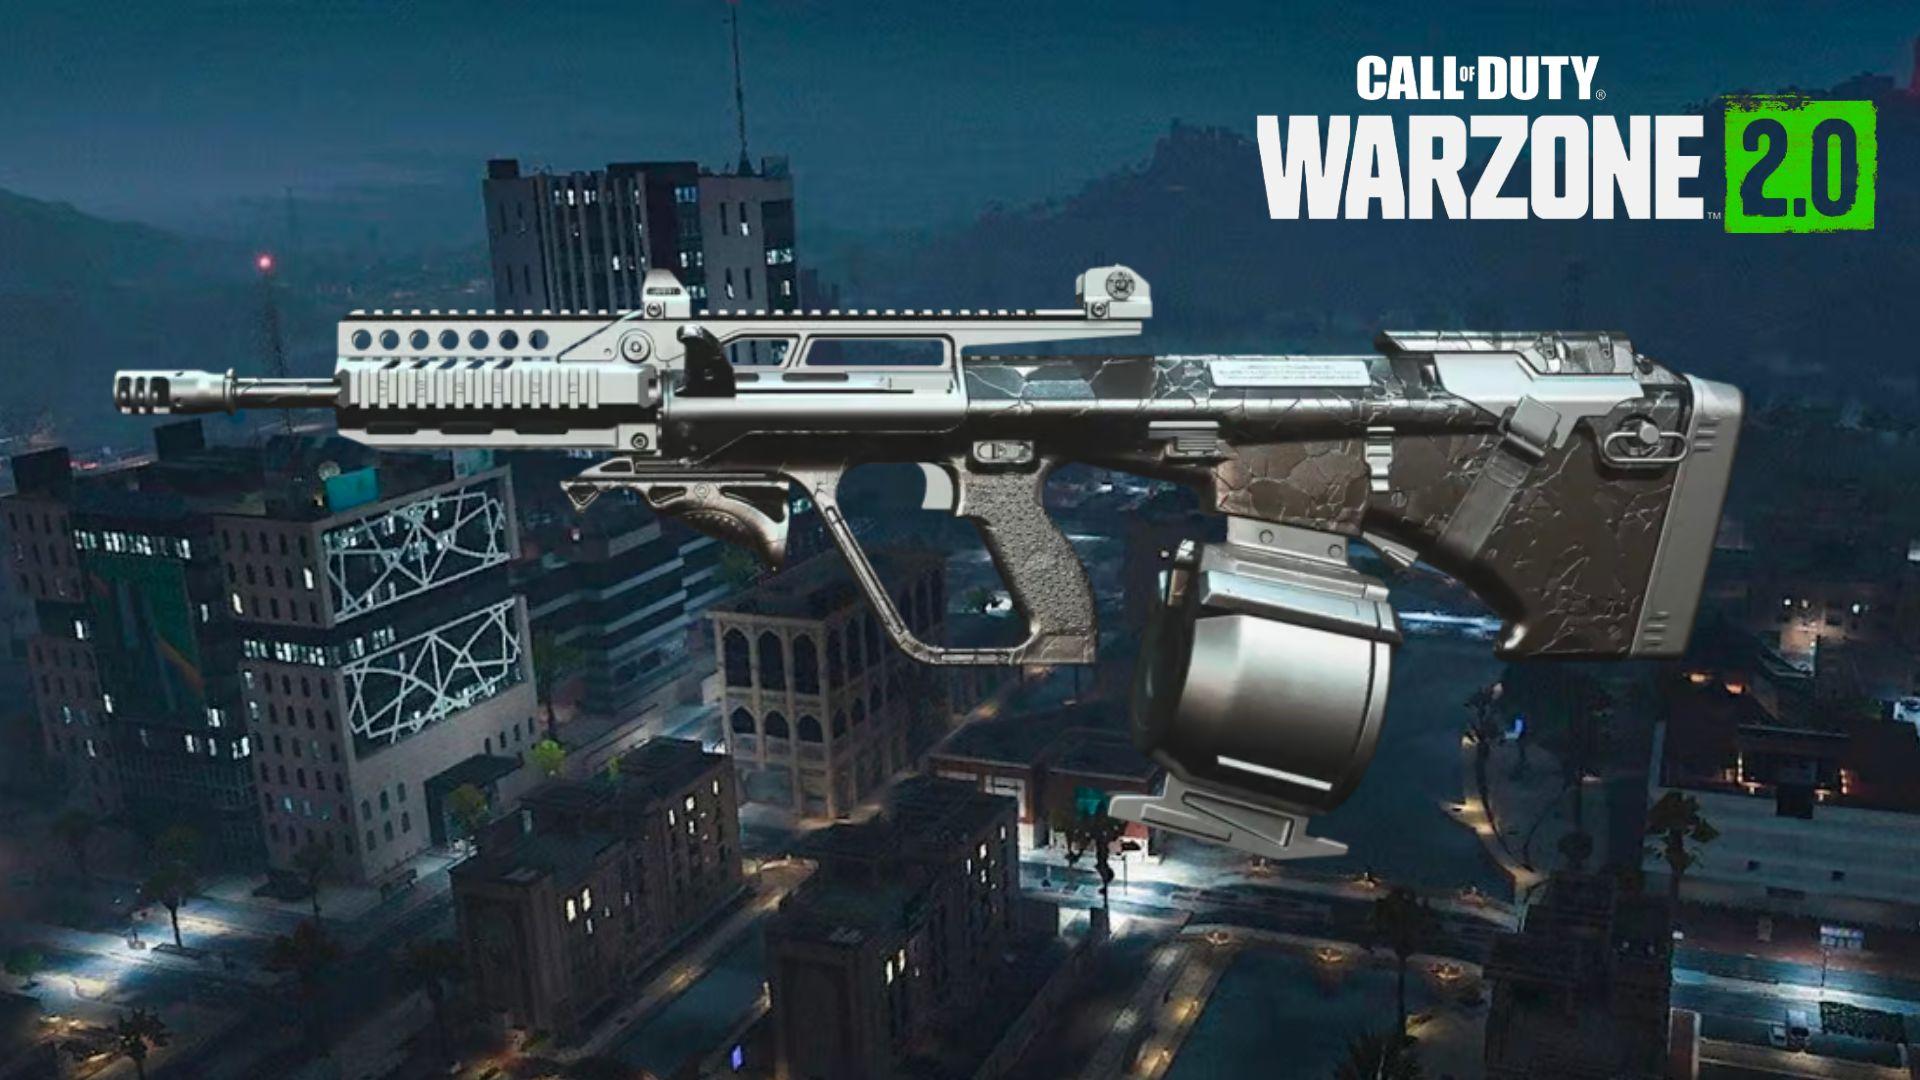 HCR 56 in silver skin on Warzone map at night time